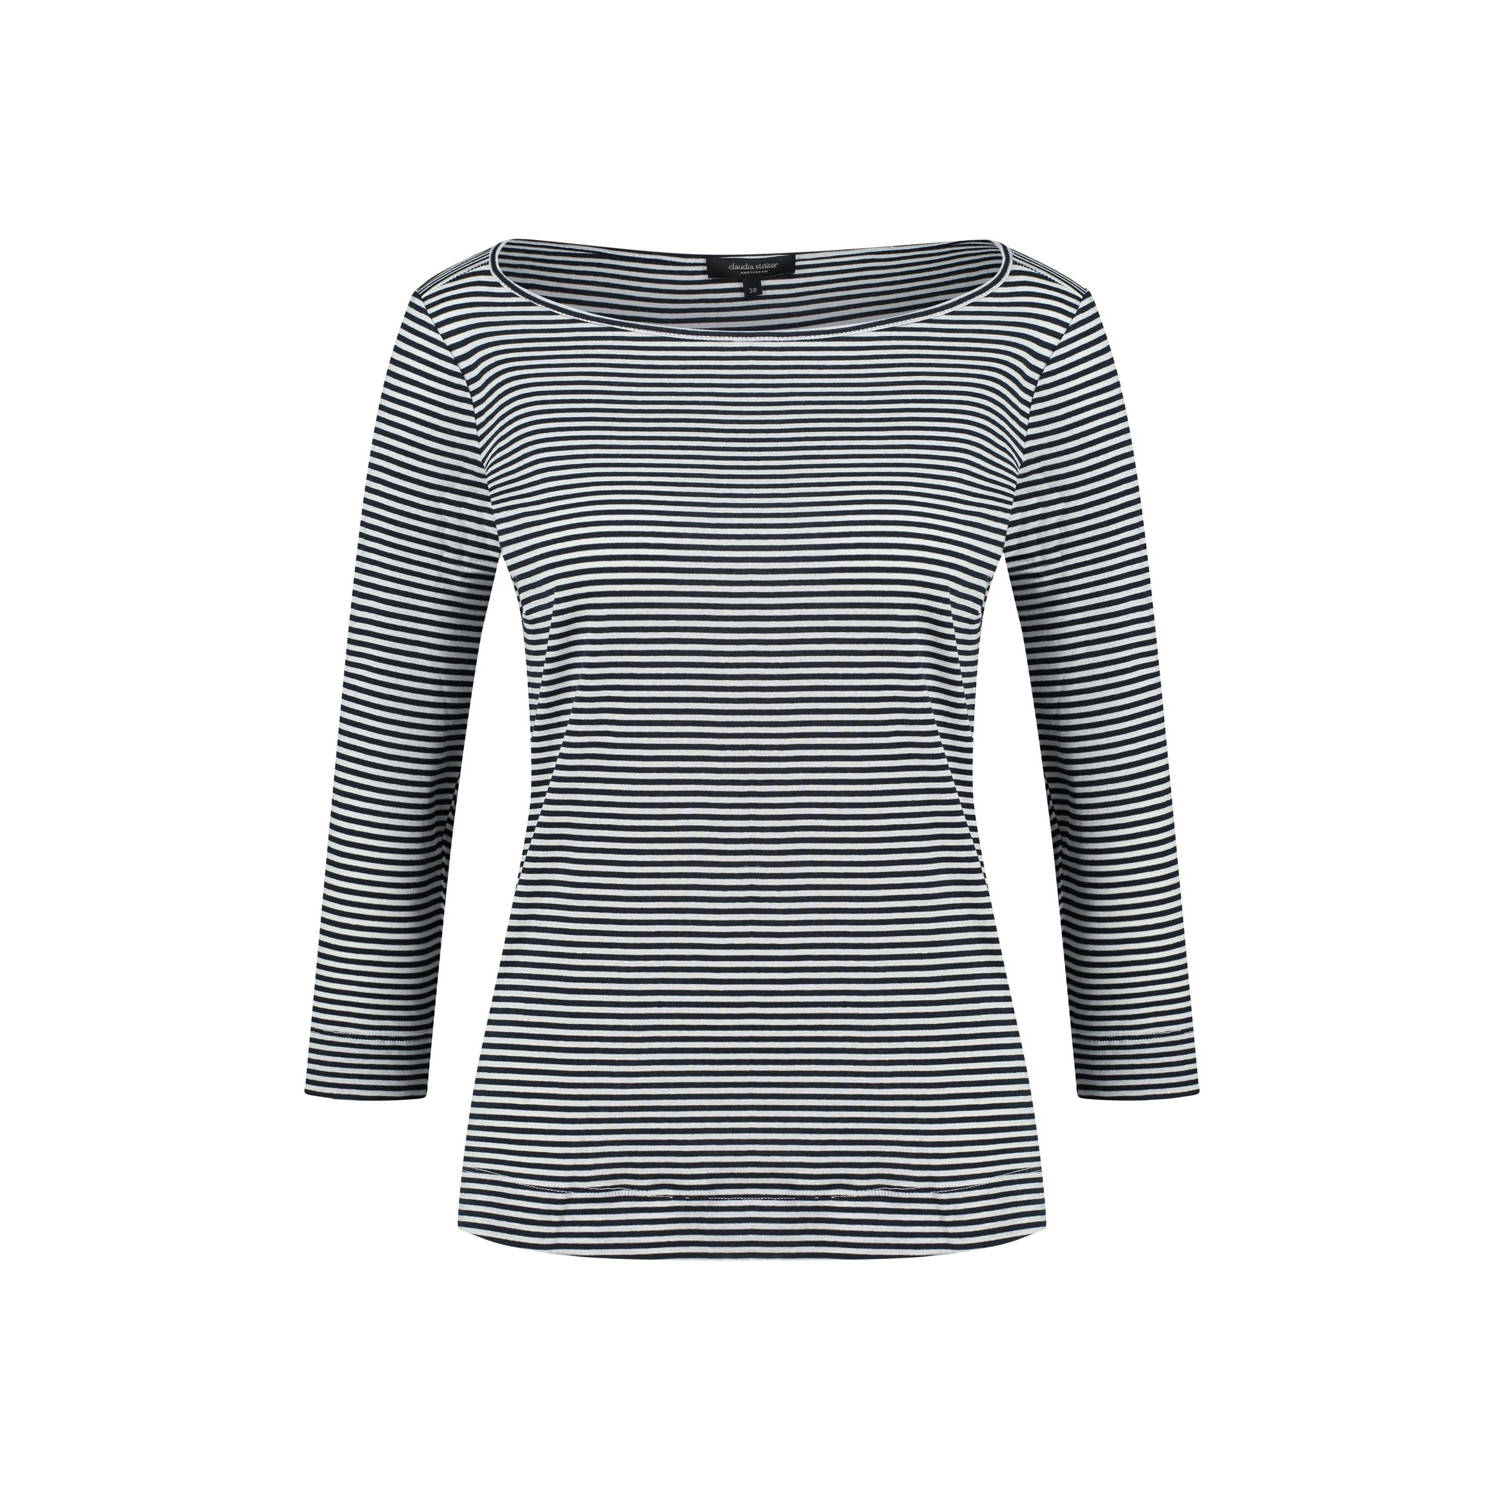 Claudia Sträter jersey boothals top donkerblauw wit